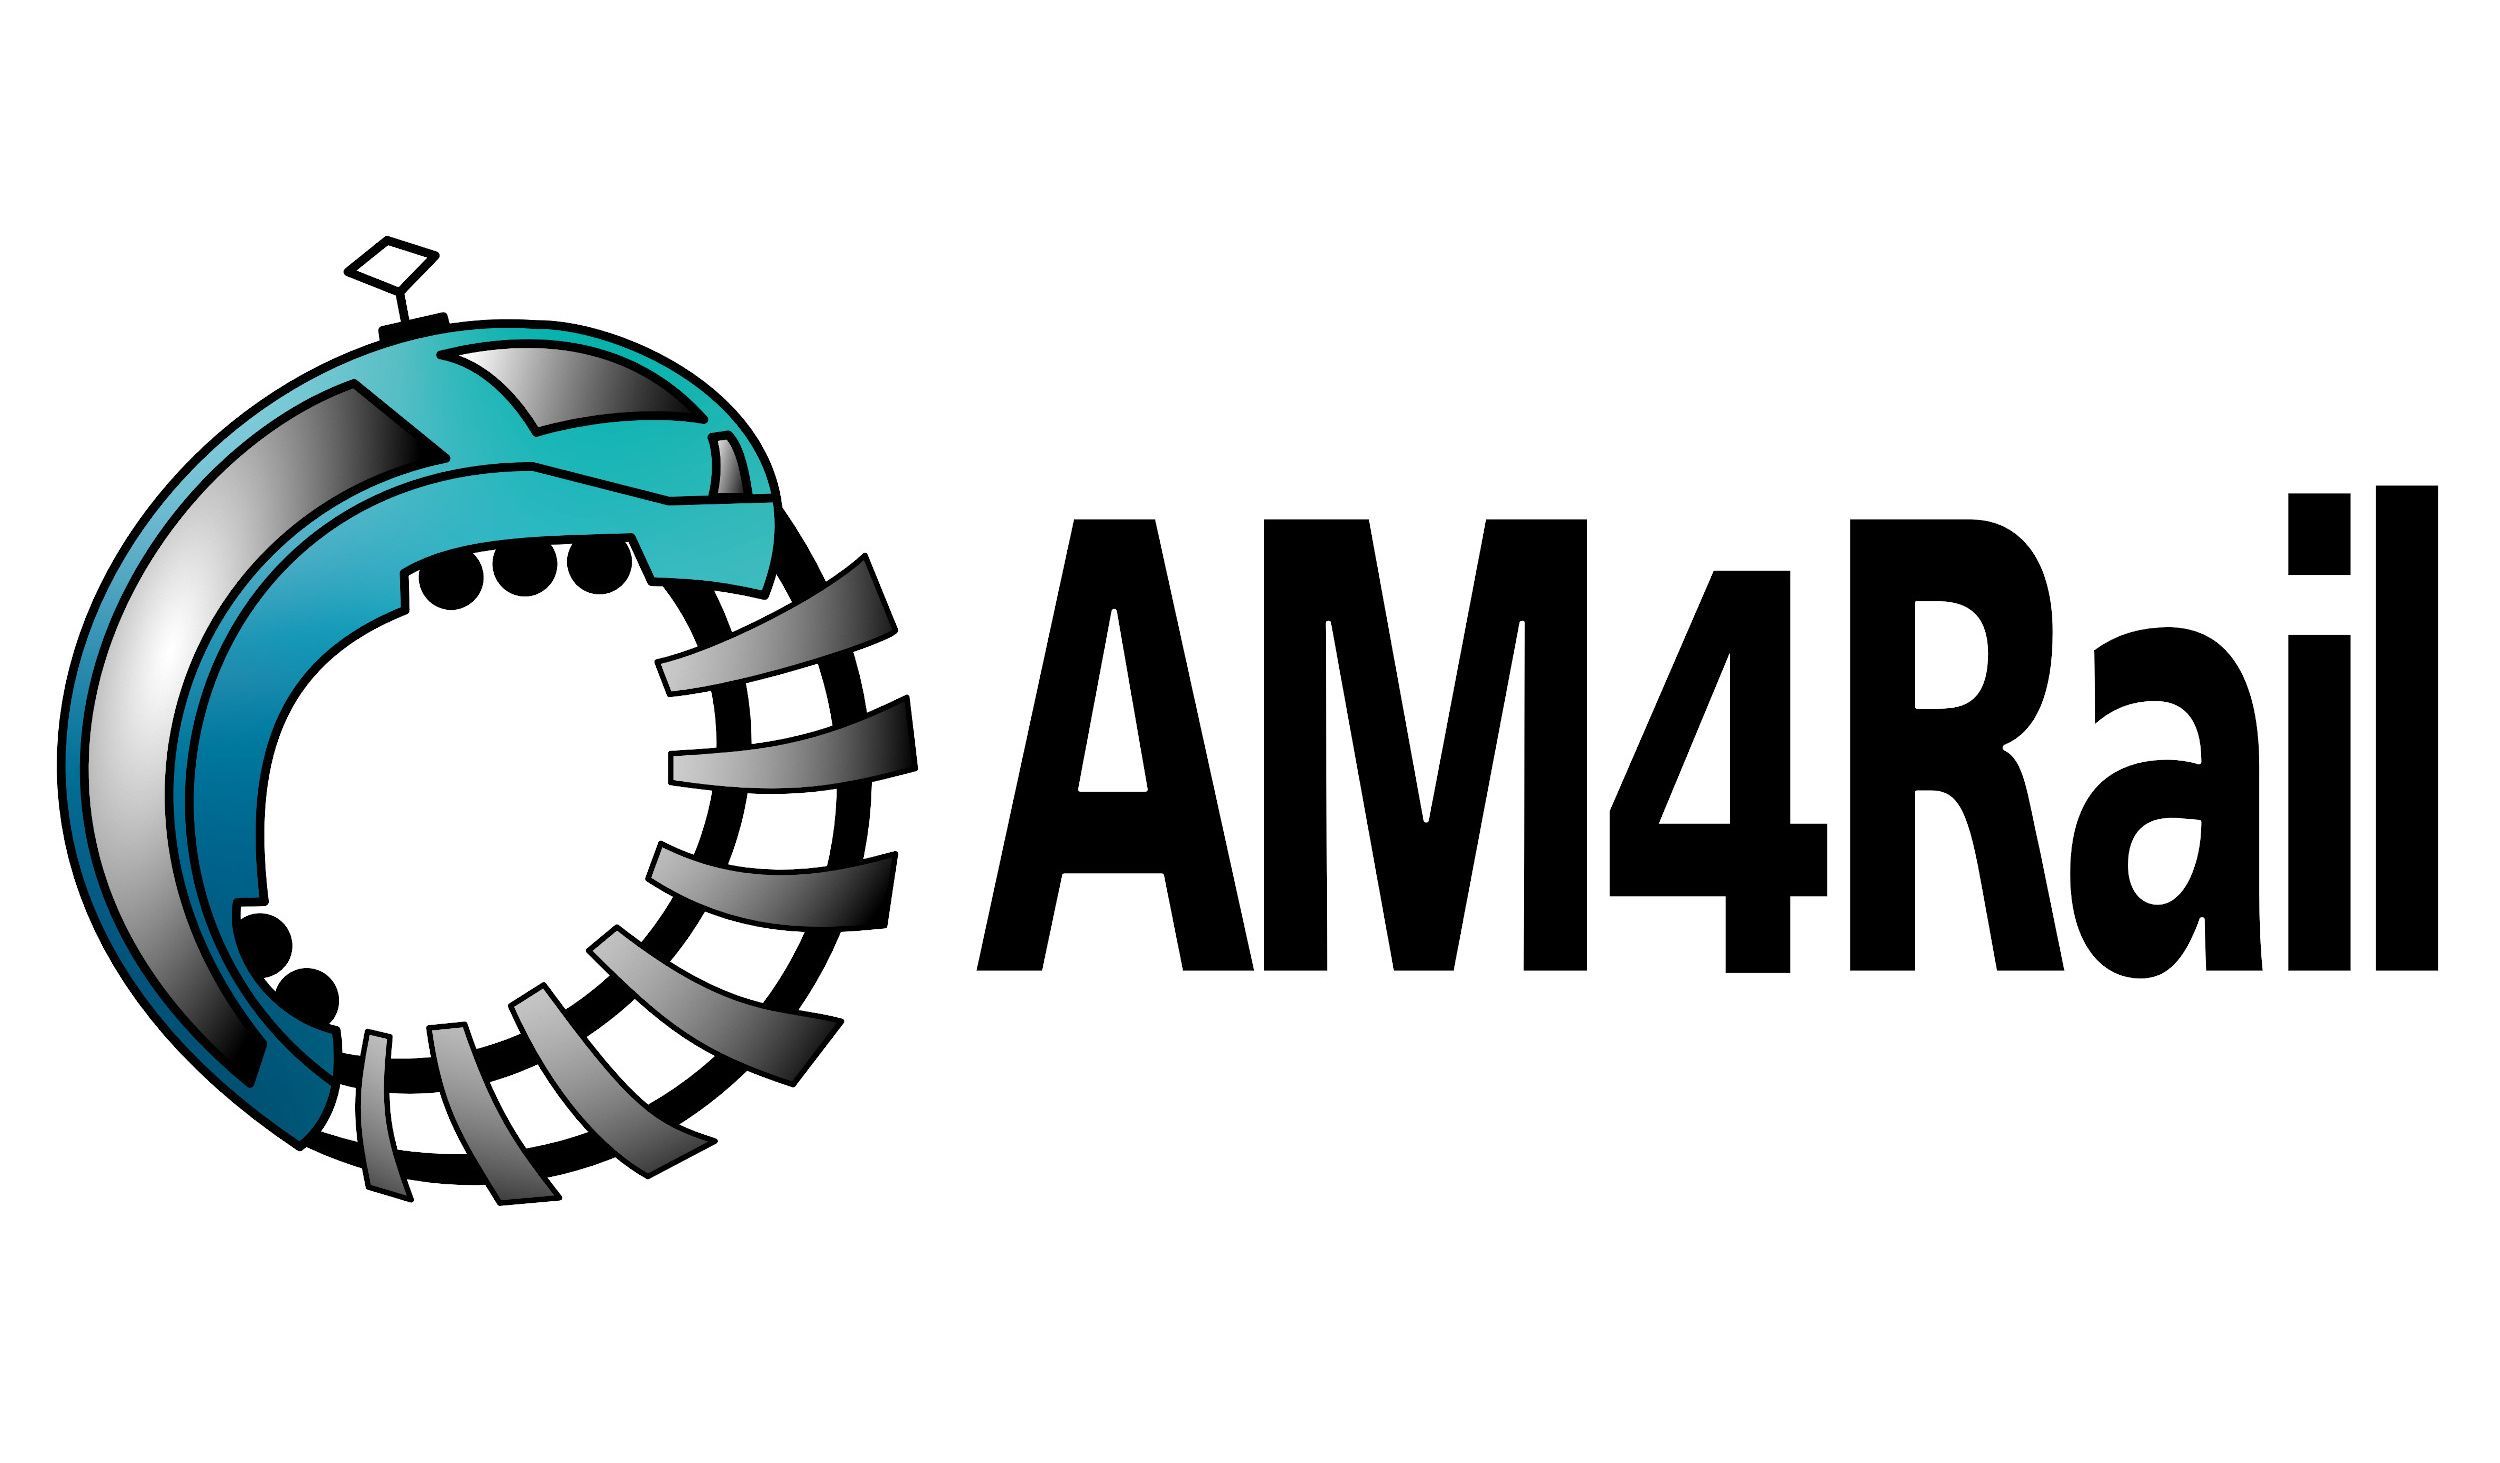 The AM4Rail logo includes a train turning in a circle on railroad tracks - like a snake biting its tail.